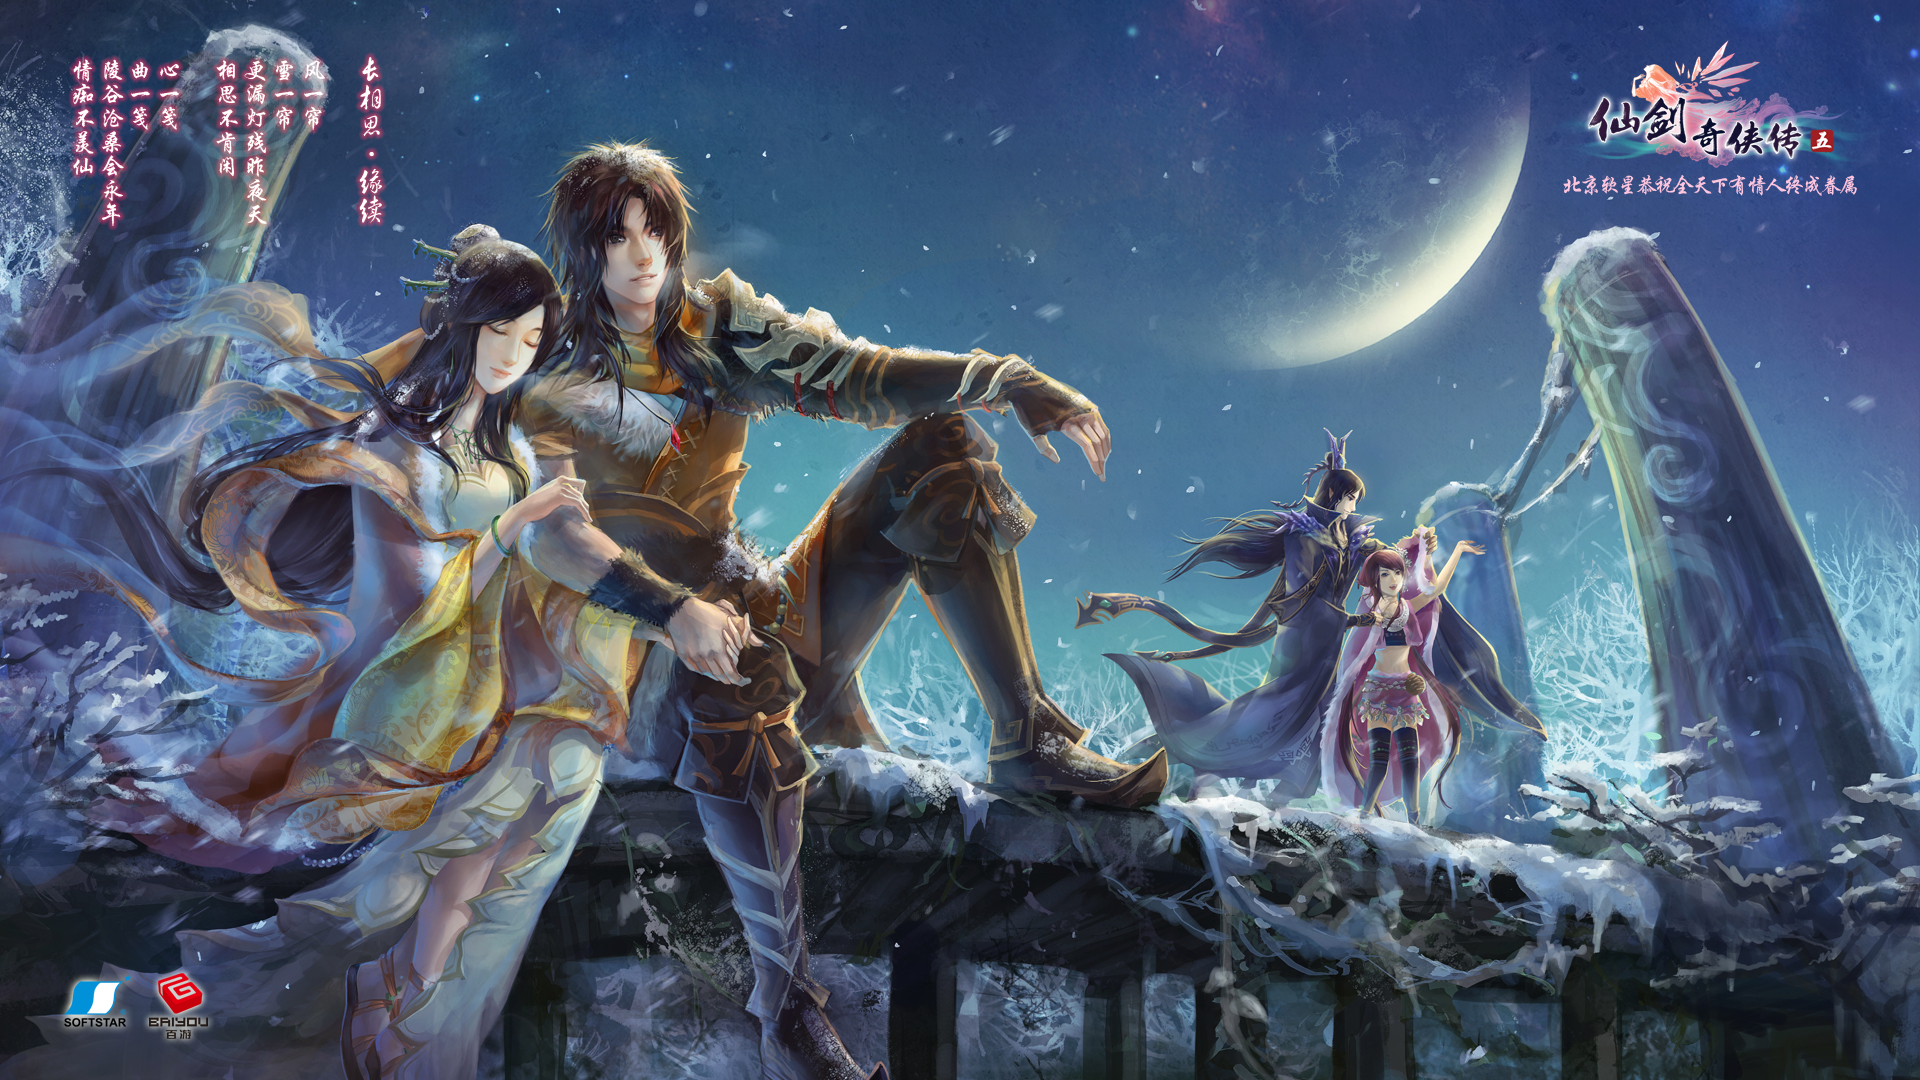 the, Legend, Of, Sword, And, Fairy, Chinese, Paladin, Fantasy, Wuxia,  15 Wallpaper